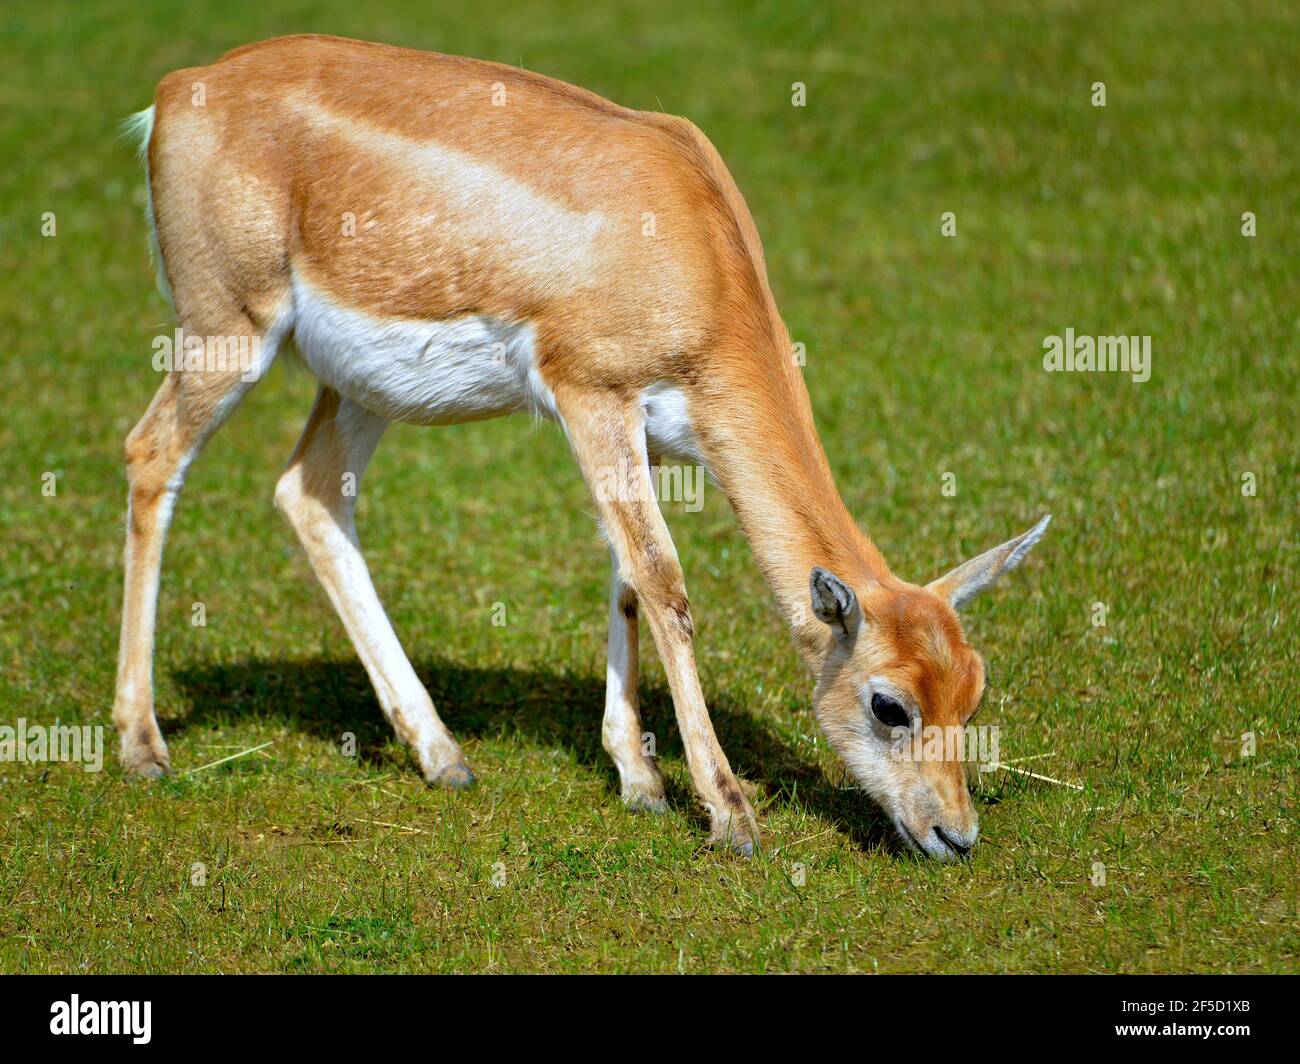 Female blackbuck (Antilope cervicapra) also known as the Indian antelope, is an antelope native to India and Nepal, grazing and seen from profile Stock Photo